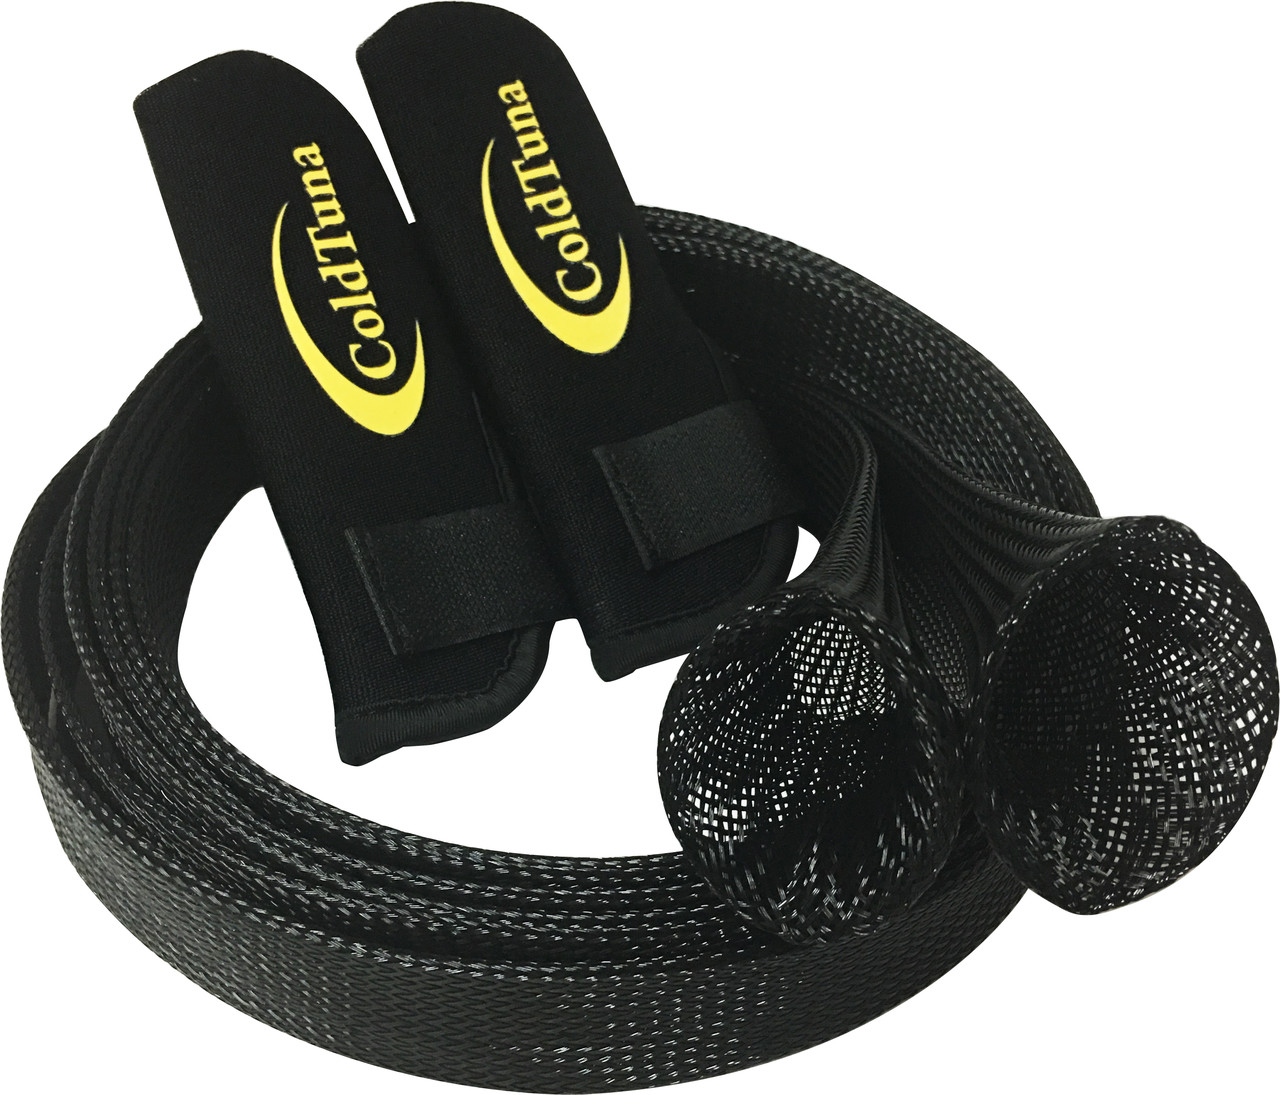 Rubber Fishing Rod Holder - Claw - Large - ColdTuna